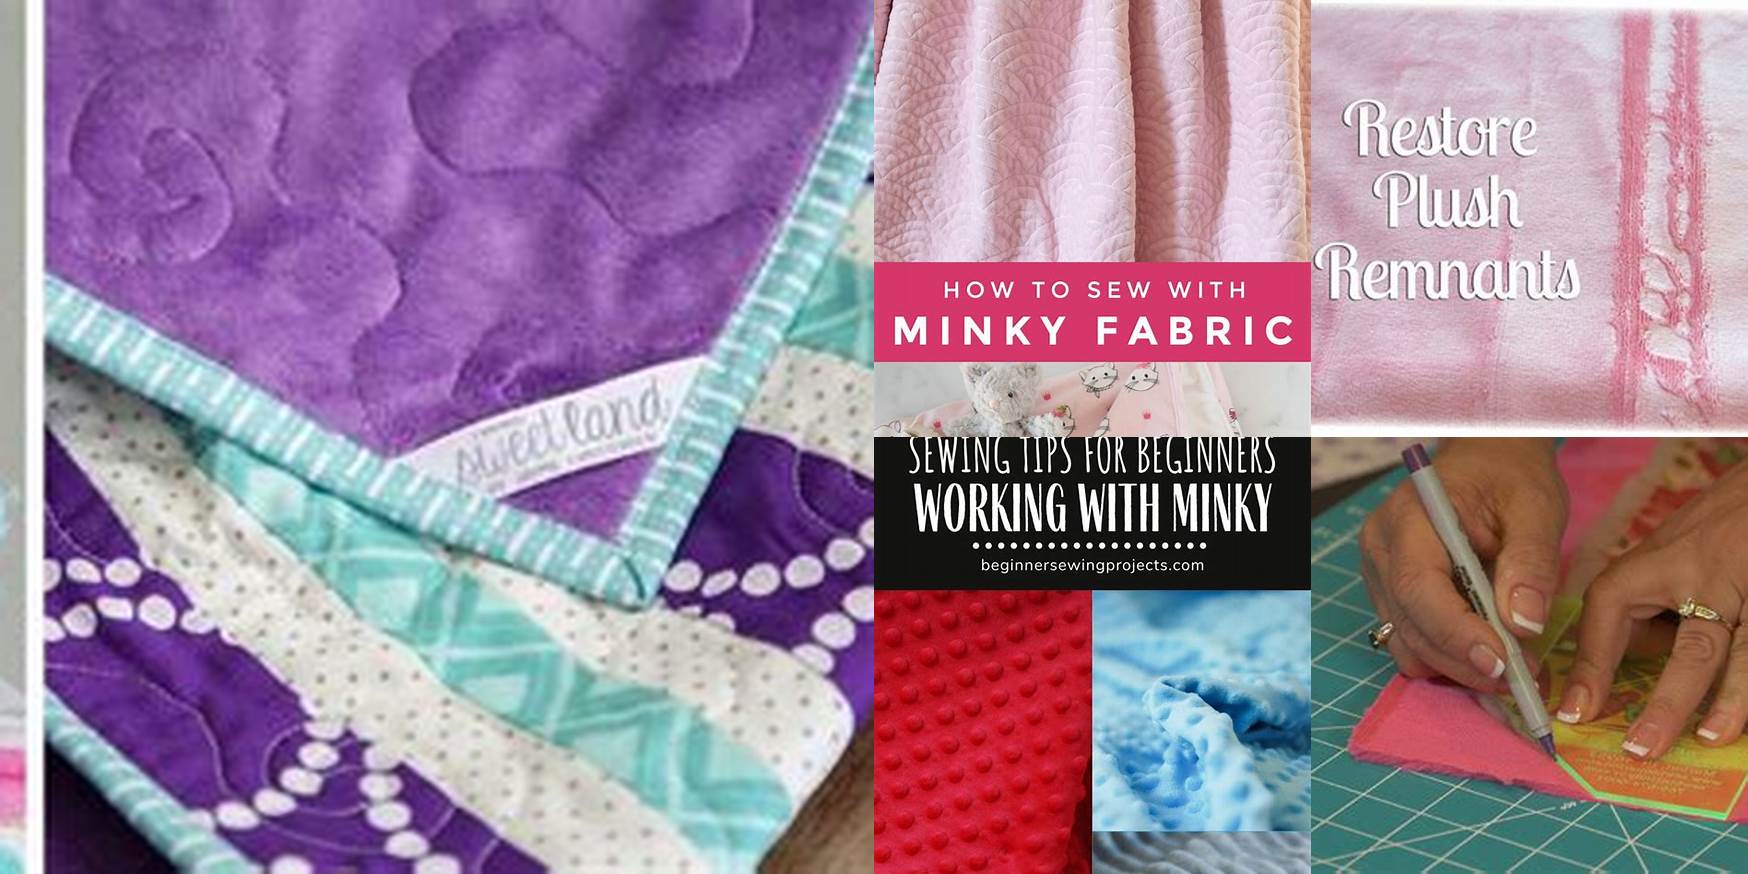 How To Restore Minky Fabric